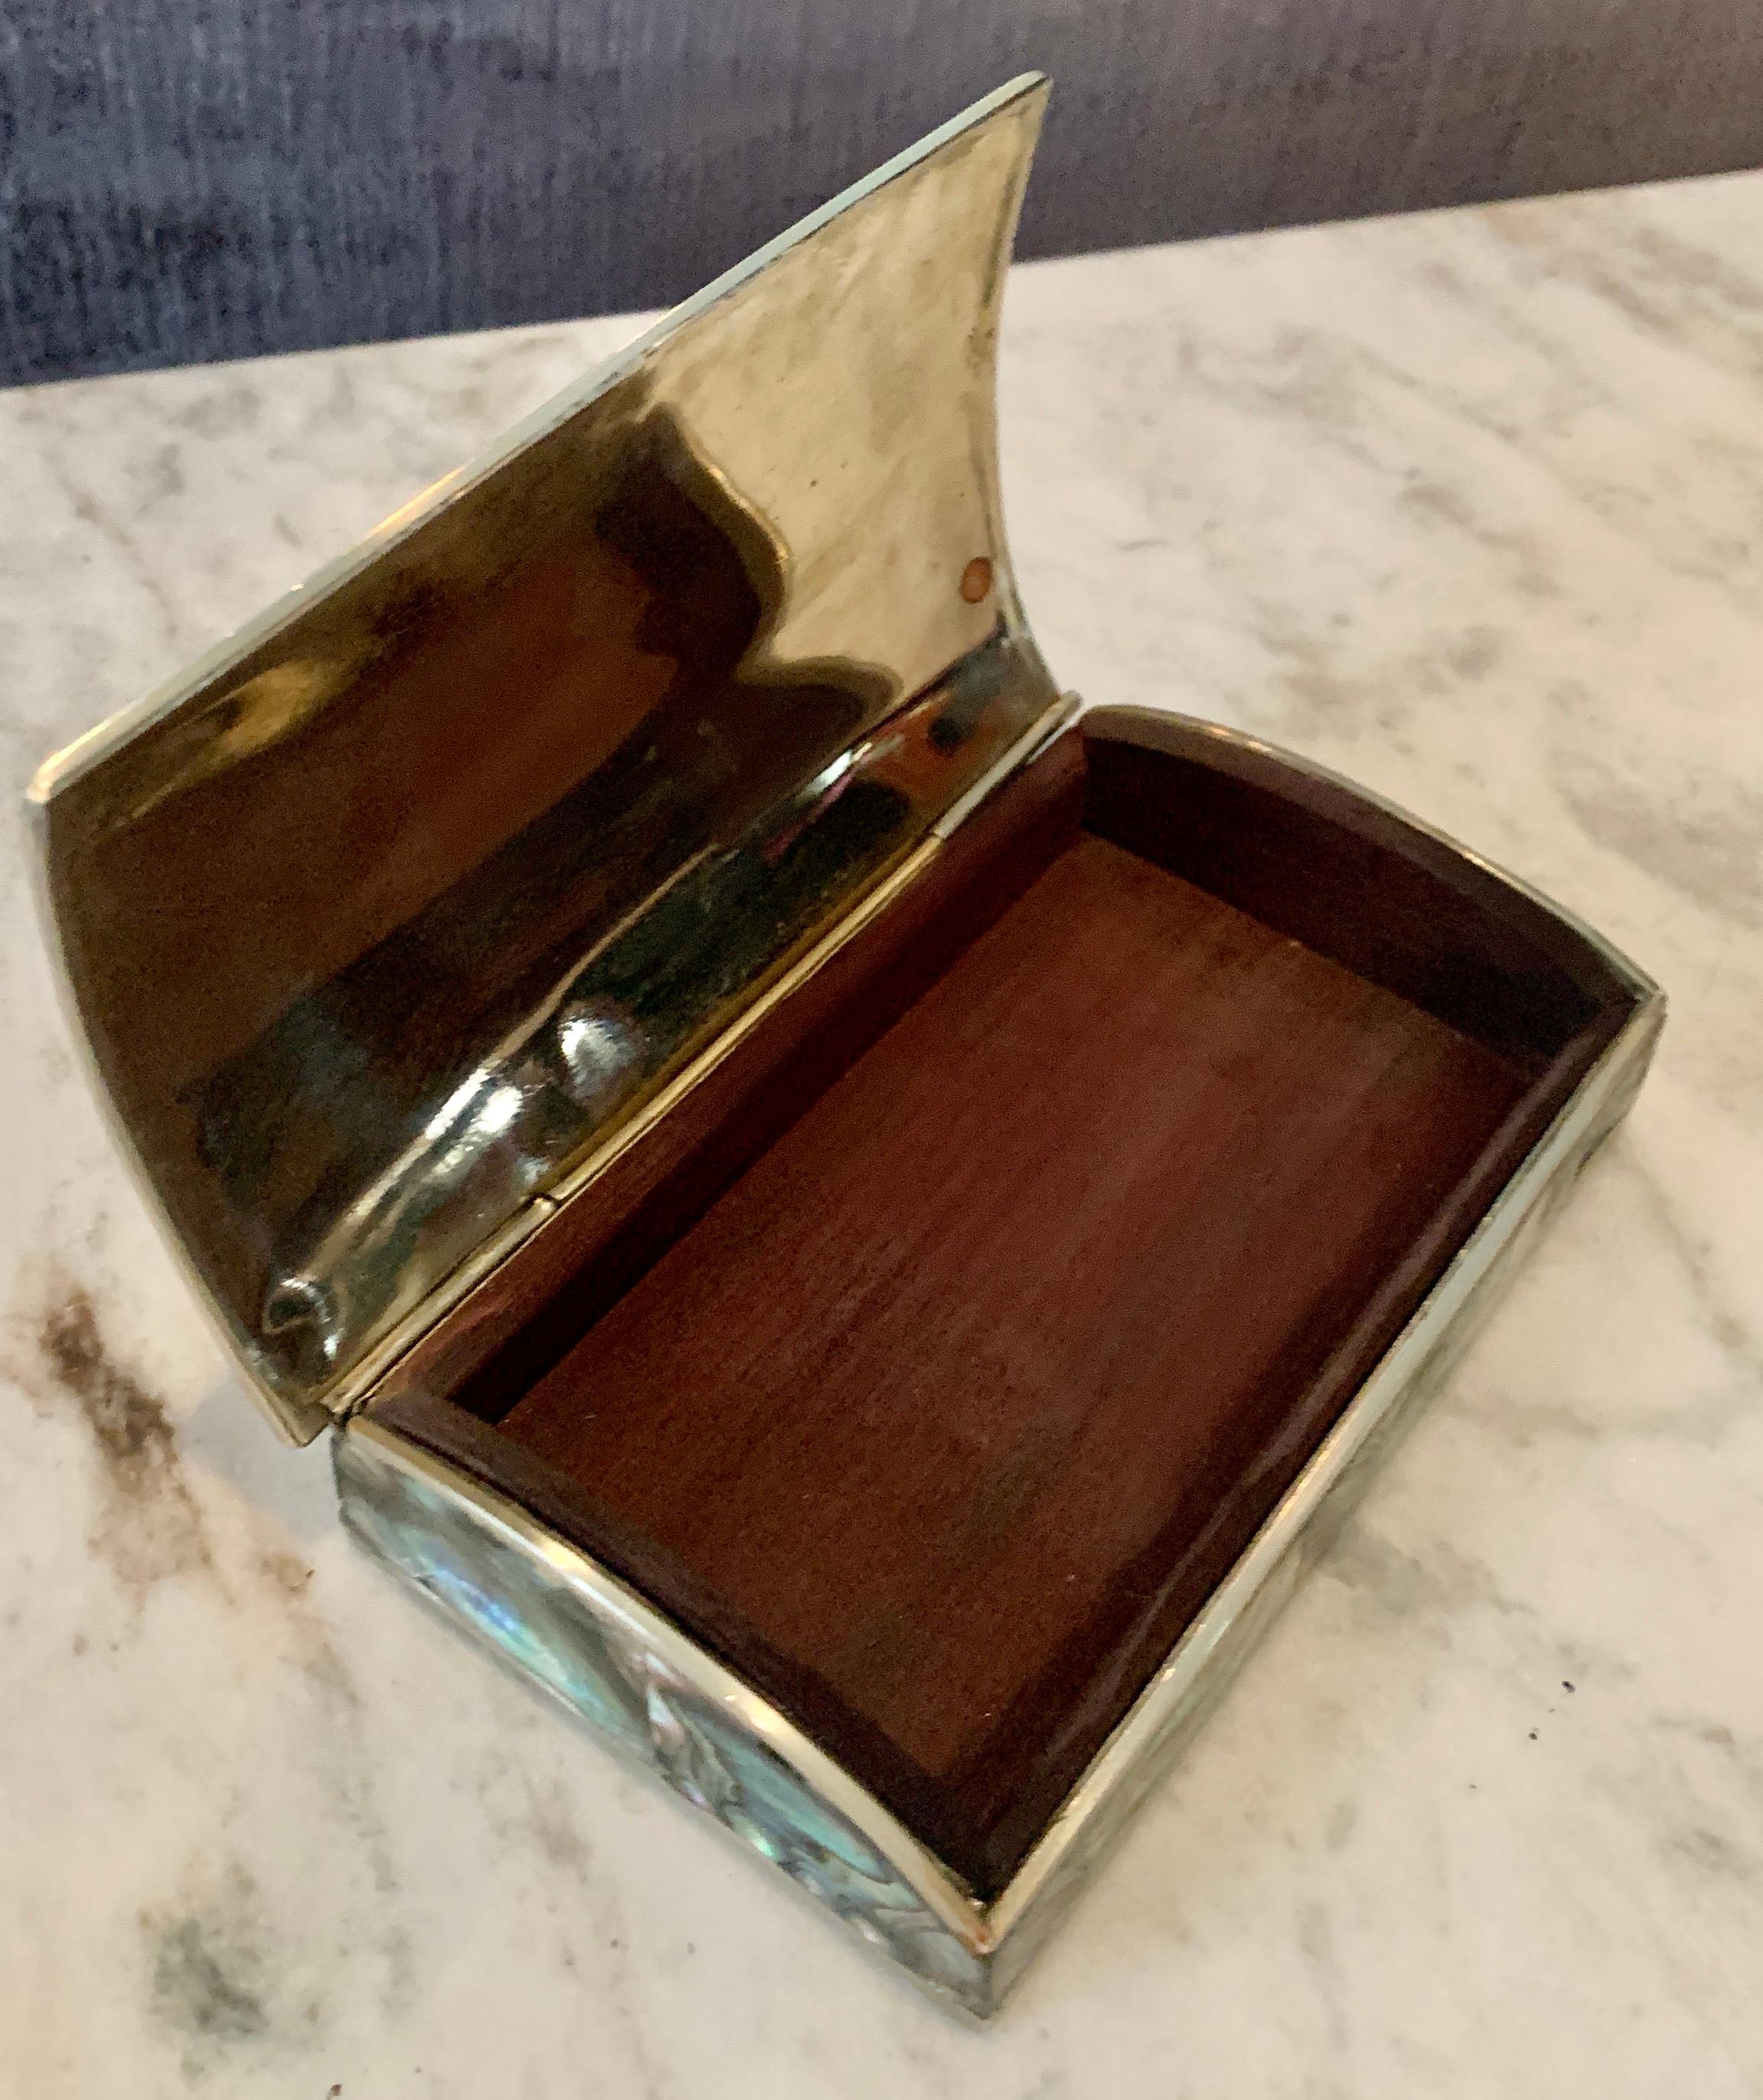 Small Abalone box acquired in Mexico - The sides are brass trim with a wood interior. A compliment to any desk or coffee table - or place to store mementos or jewelry.